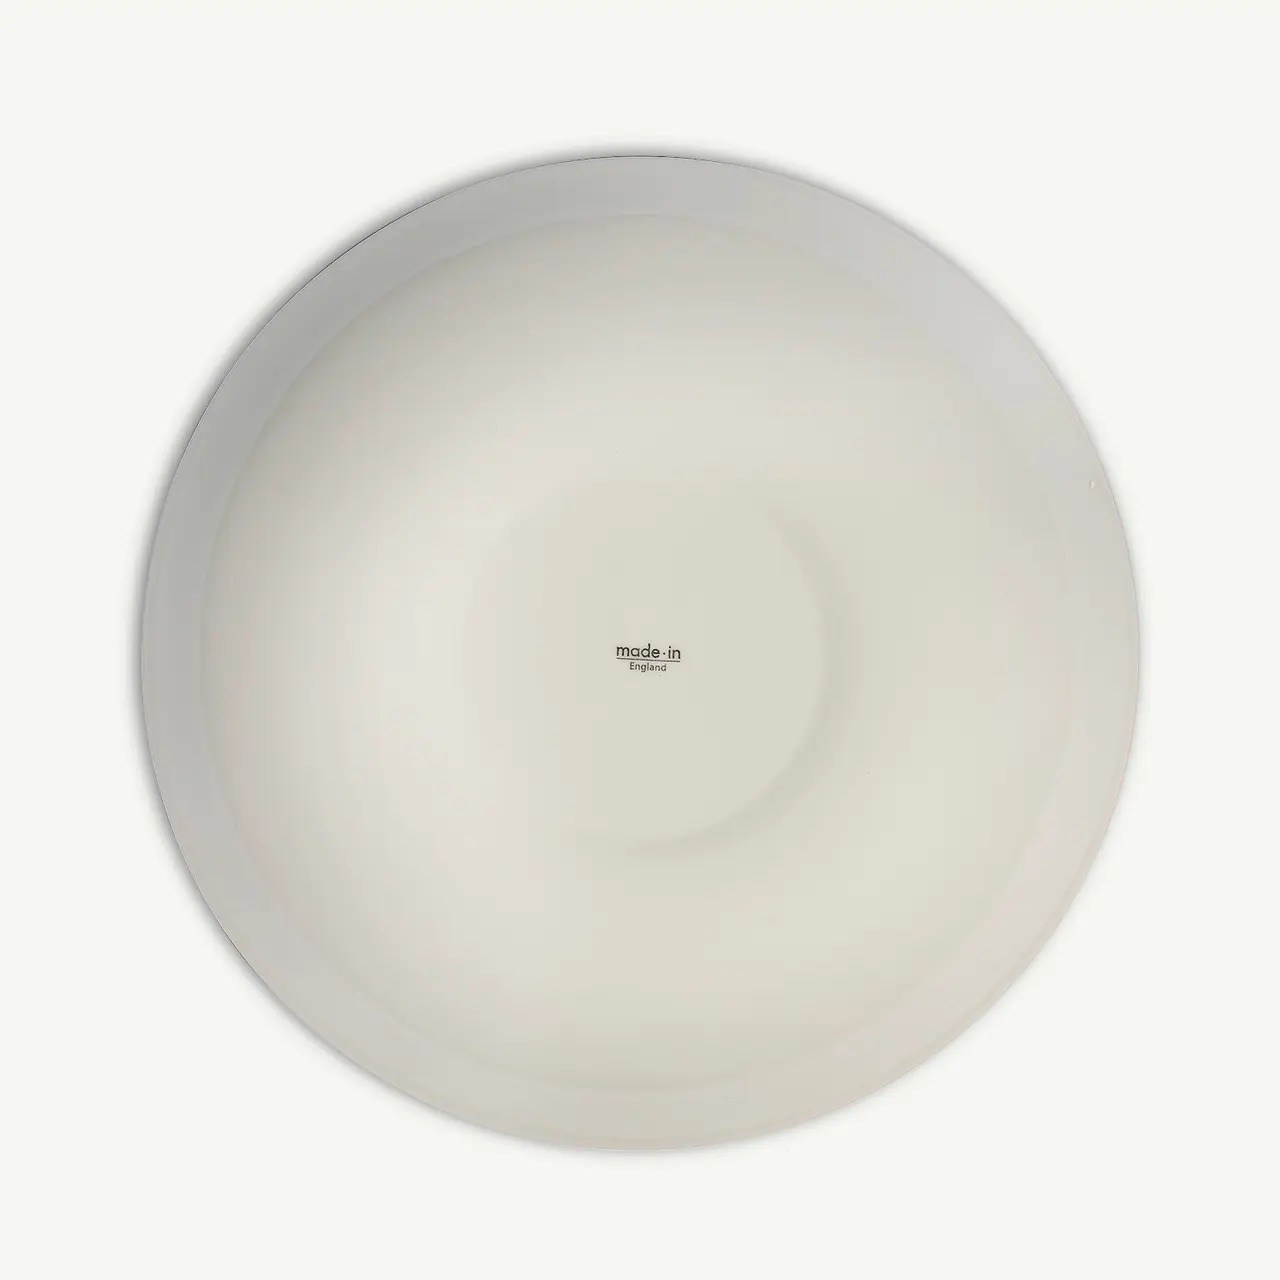 A plain white circular plate with a small "made.in" text at the center is displayed against a white background.